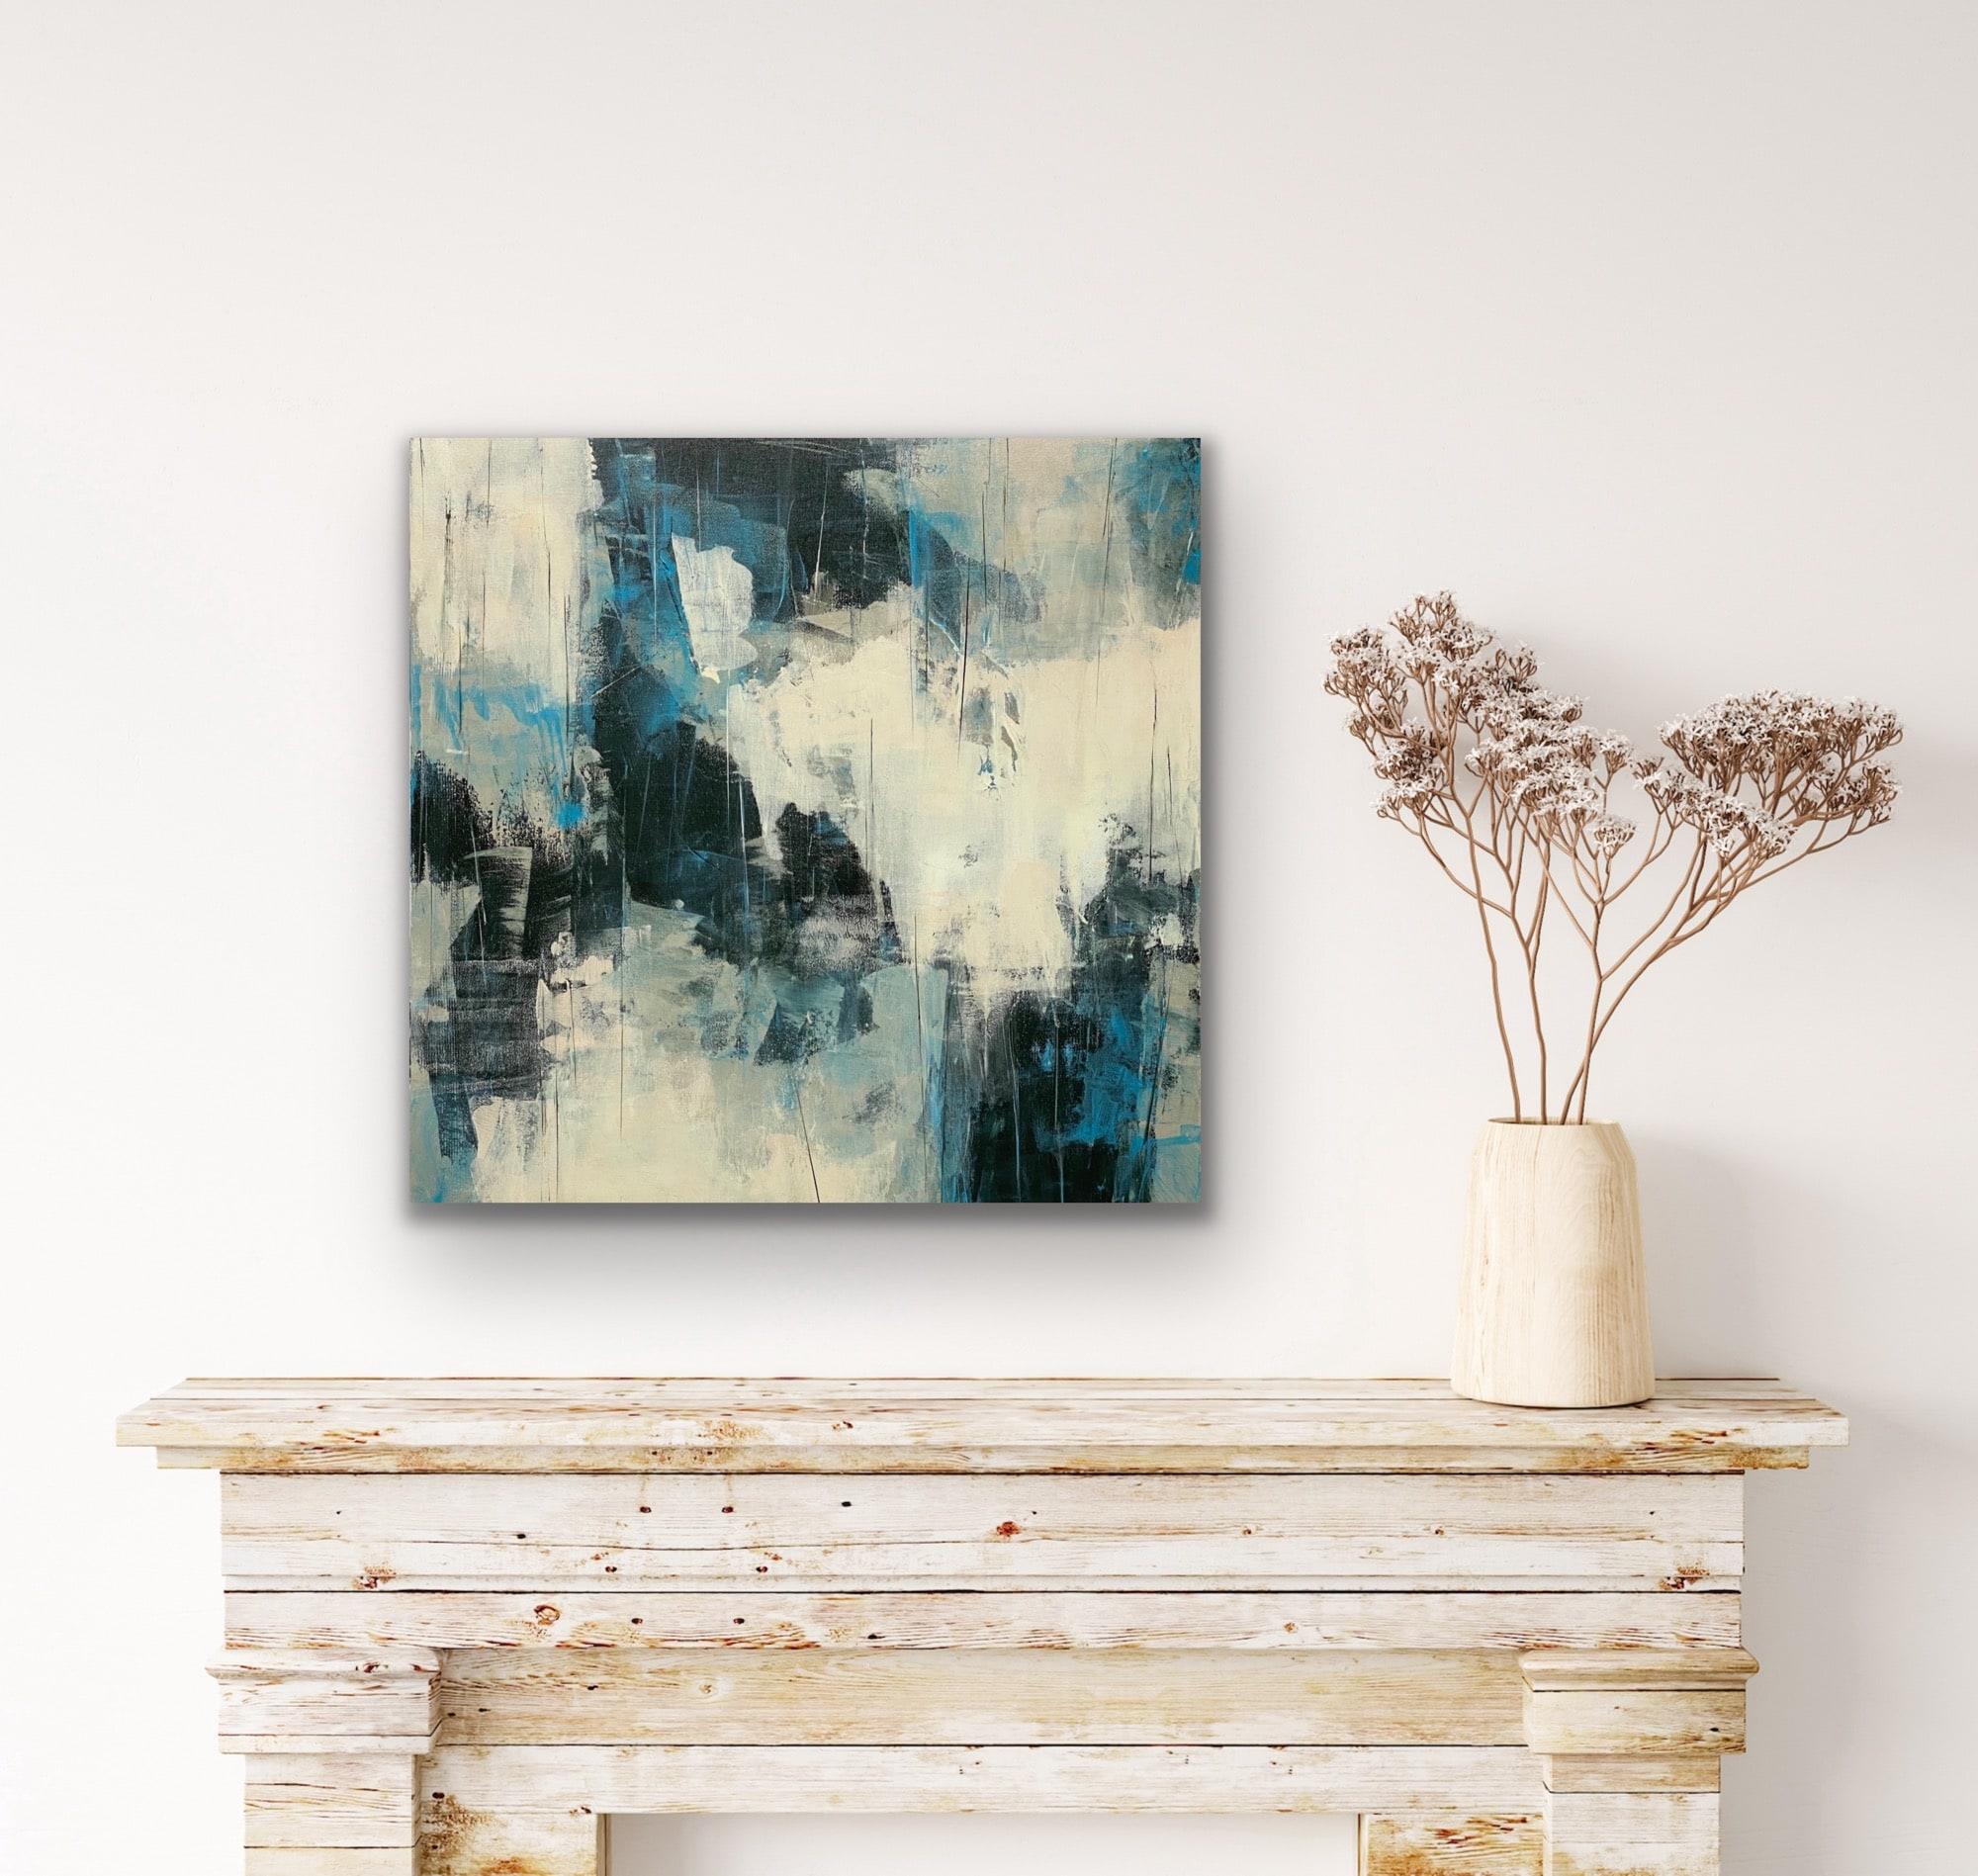 “Cutting Edge” 24 x 24 inches is a one-of-a-kind original, modern abstract expressionist painting by Juanita Bellavance. In this somewhat edgy painting blue, black, gray and white create an expression of line, shape and movement.

Statement:

I